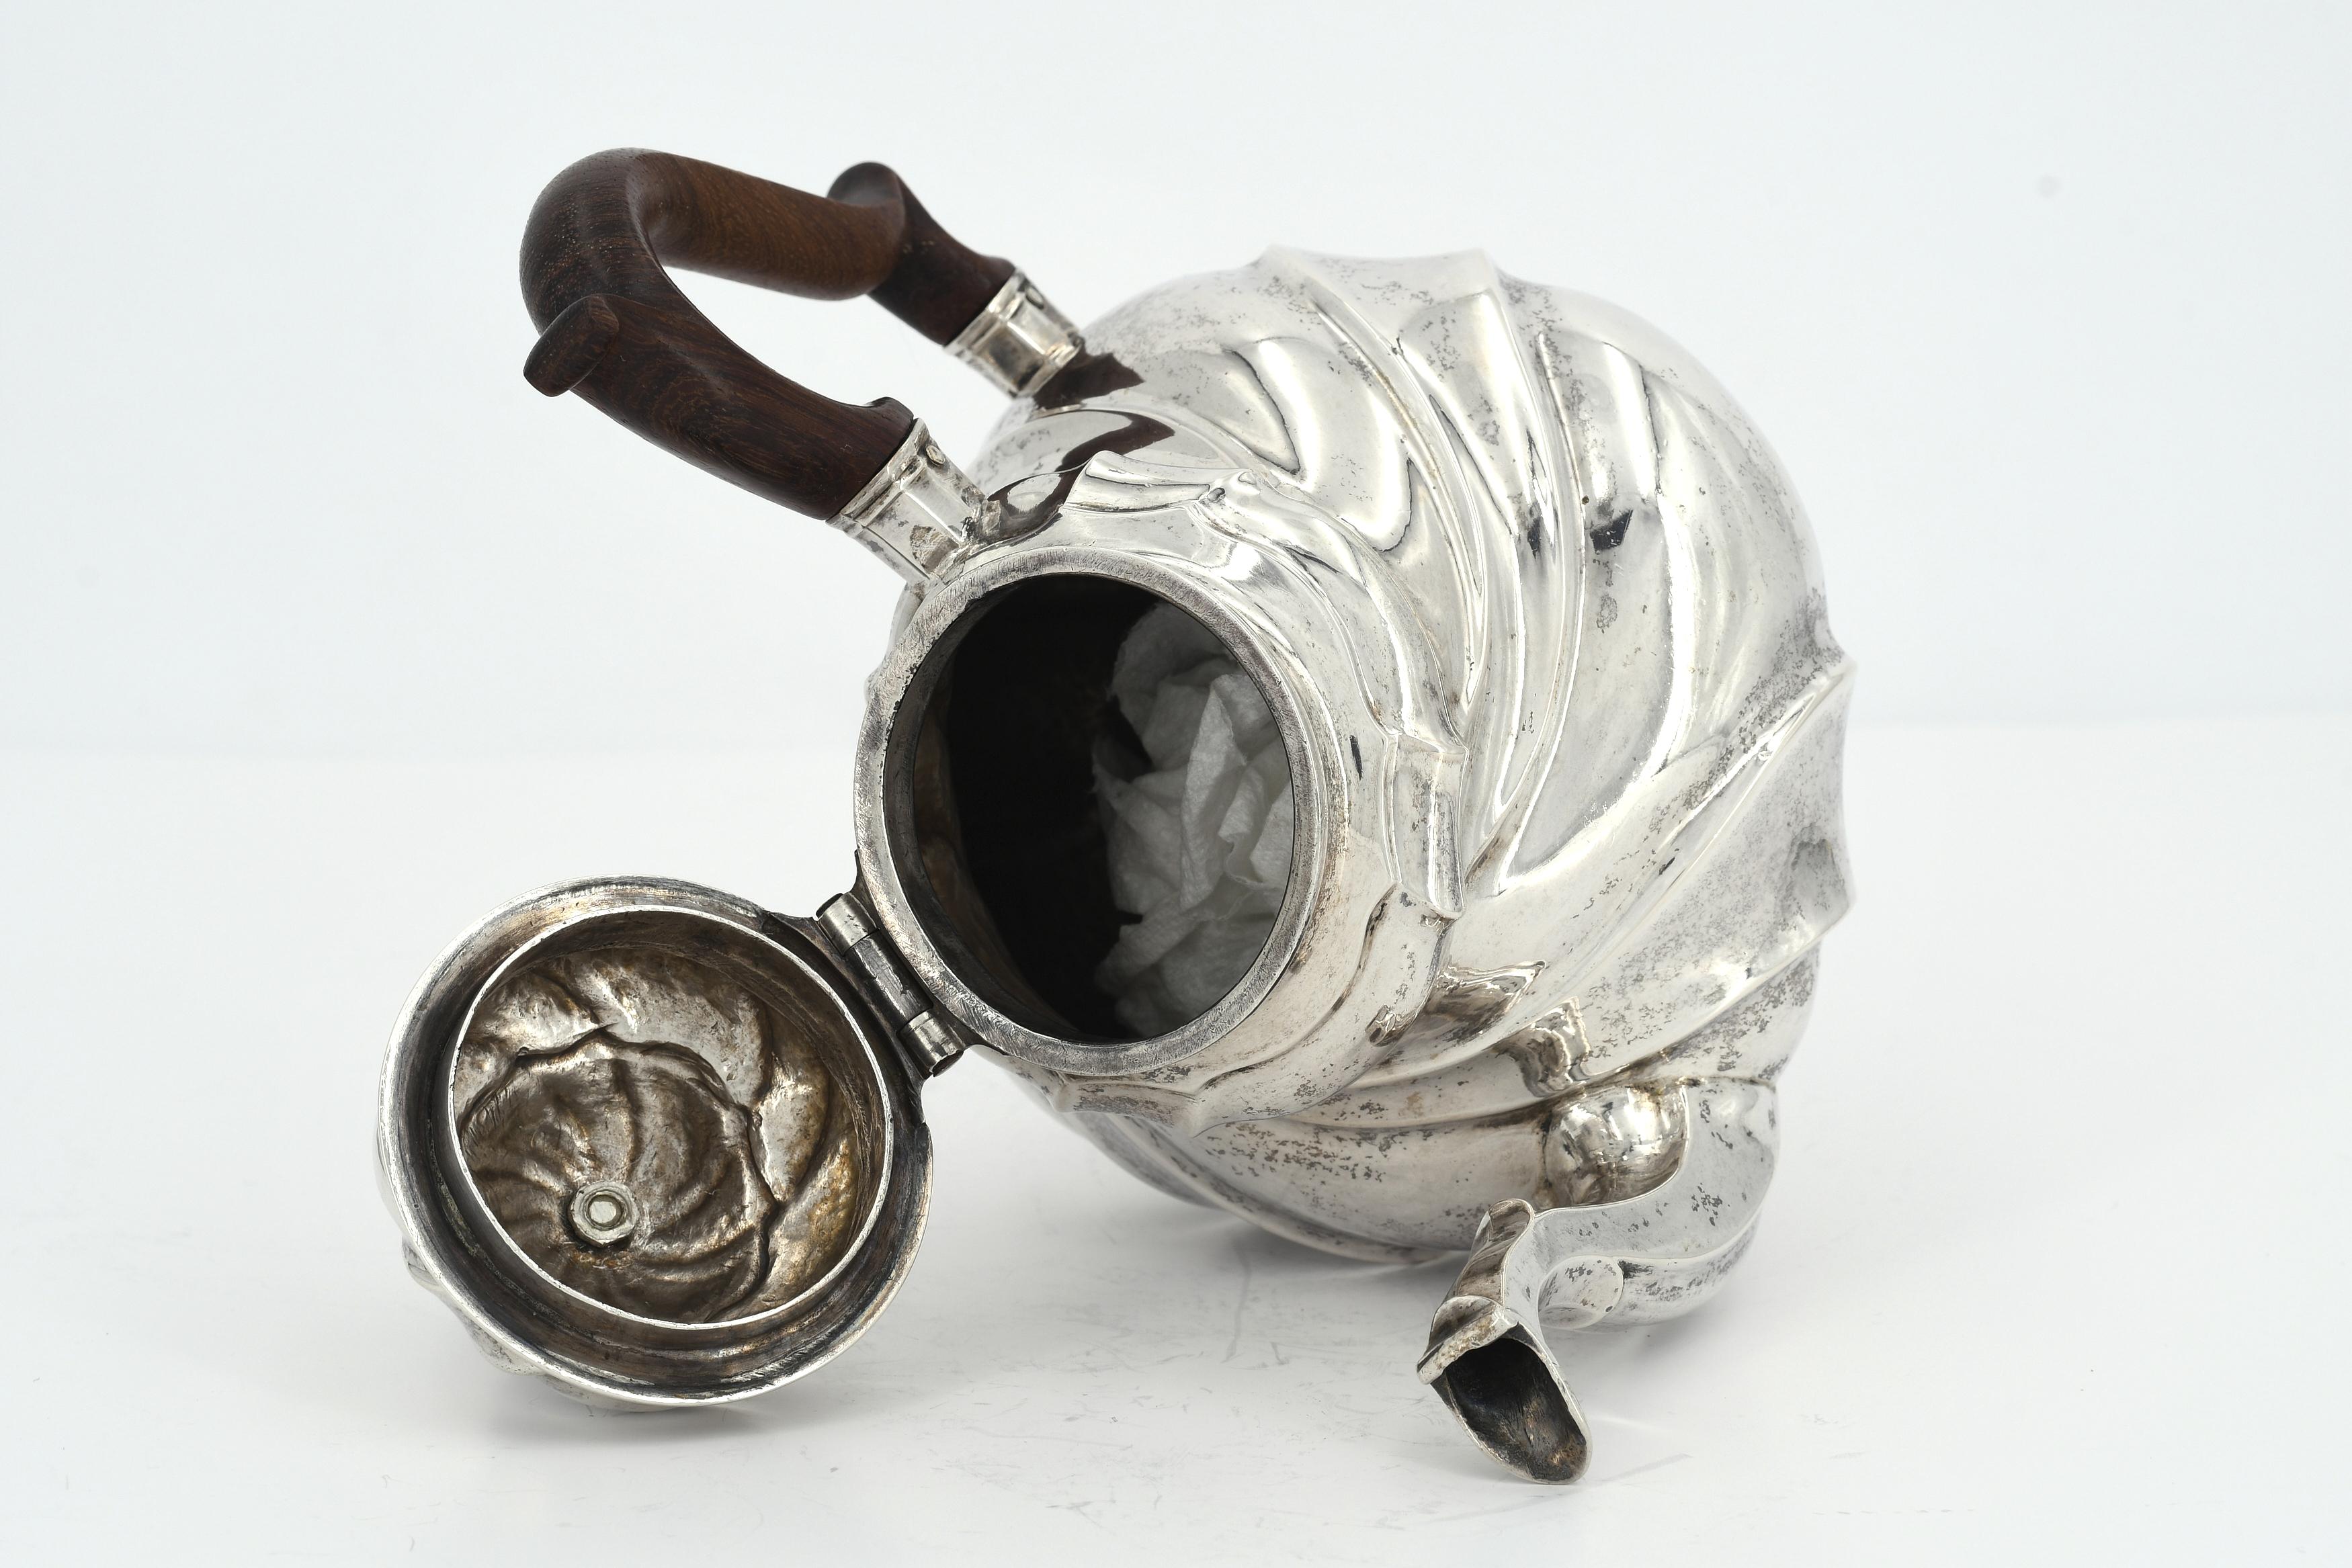 SILVER TEAPOT WITH TWIST-FLUTED FEATURES. - Image 5 of 6